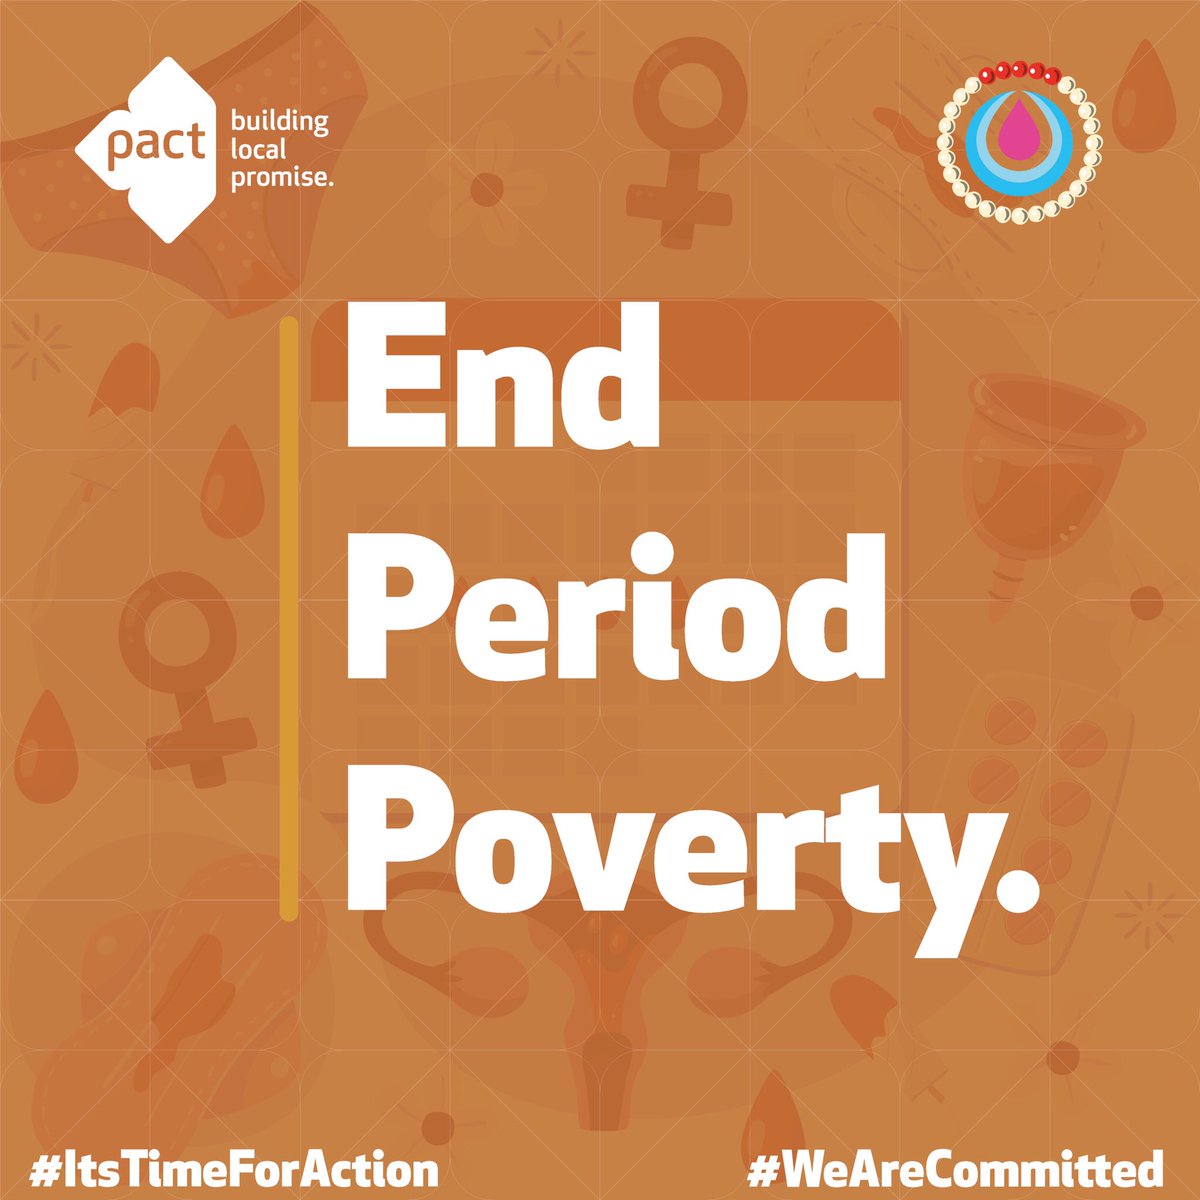 Million of girls and women cannot access their periods hygienically, safely, &with dignity

ItstimeForAction, ⏰ to promote the availability of sanitary products, period friendly infrastructures, safe mechanisms 4 reuse &disposal. Are you with us?

#Tanzania  #MenstrualHygieneDay